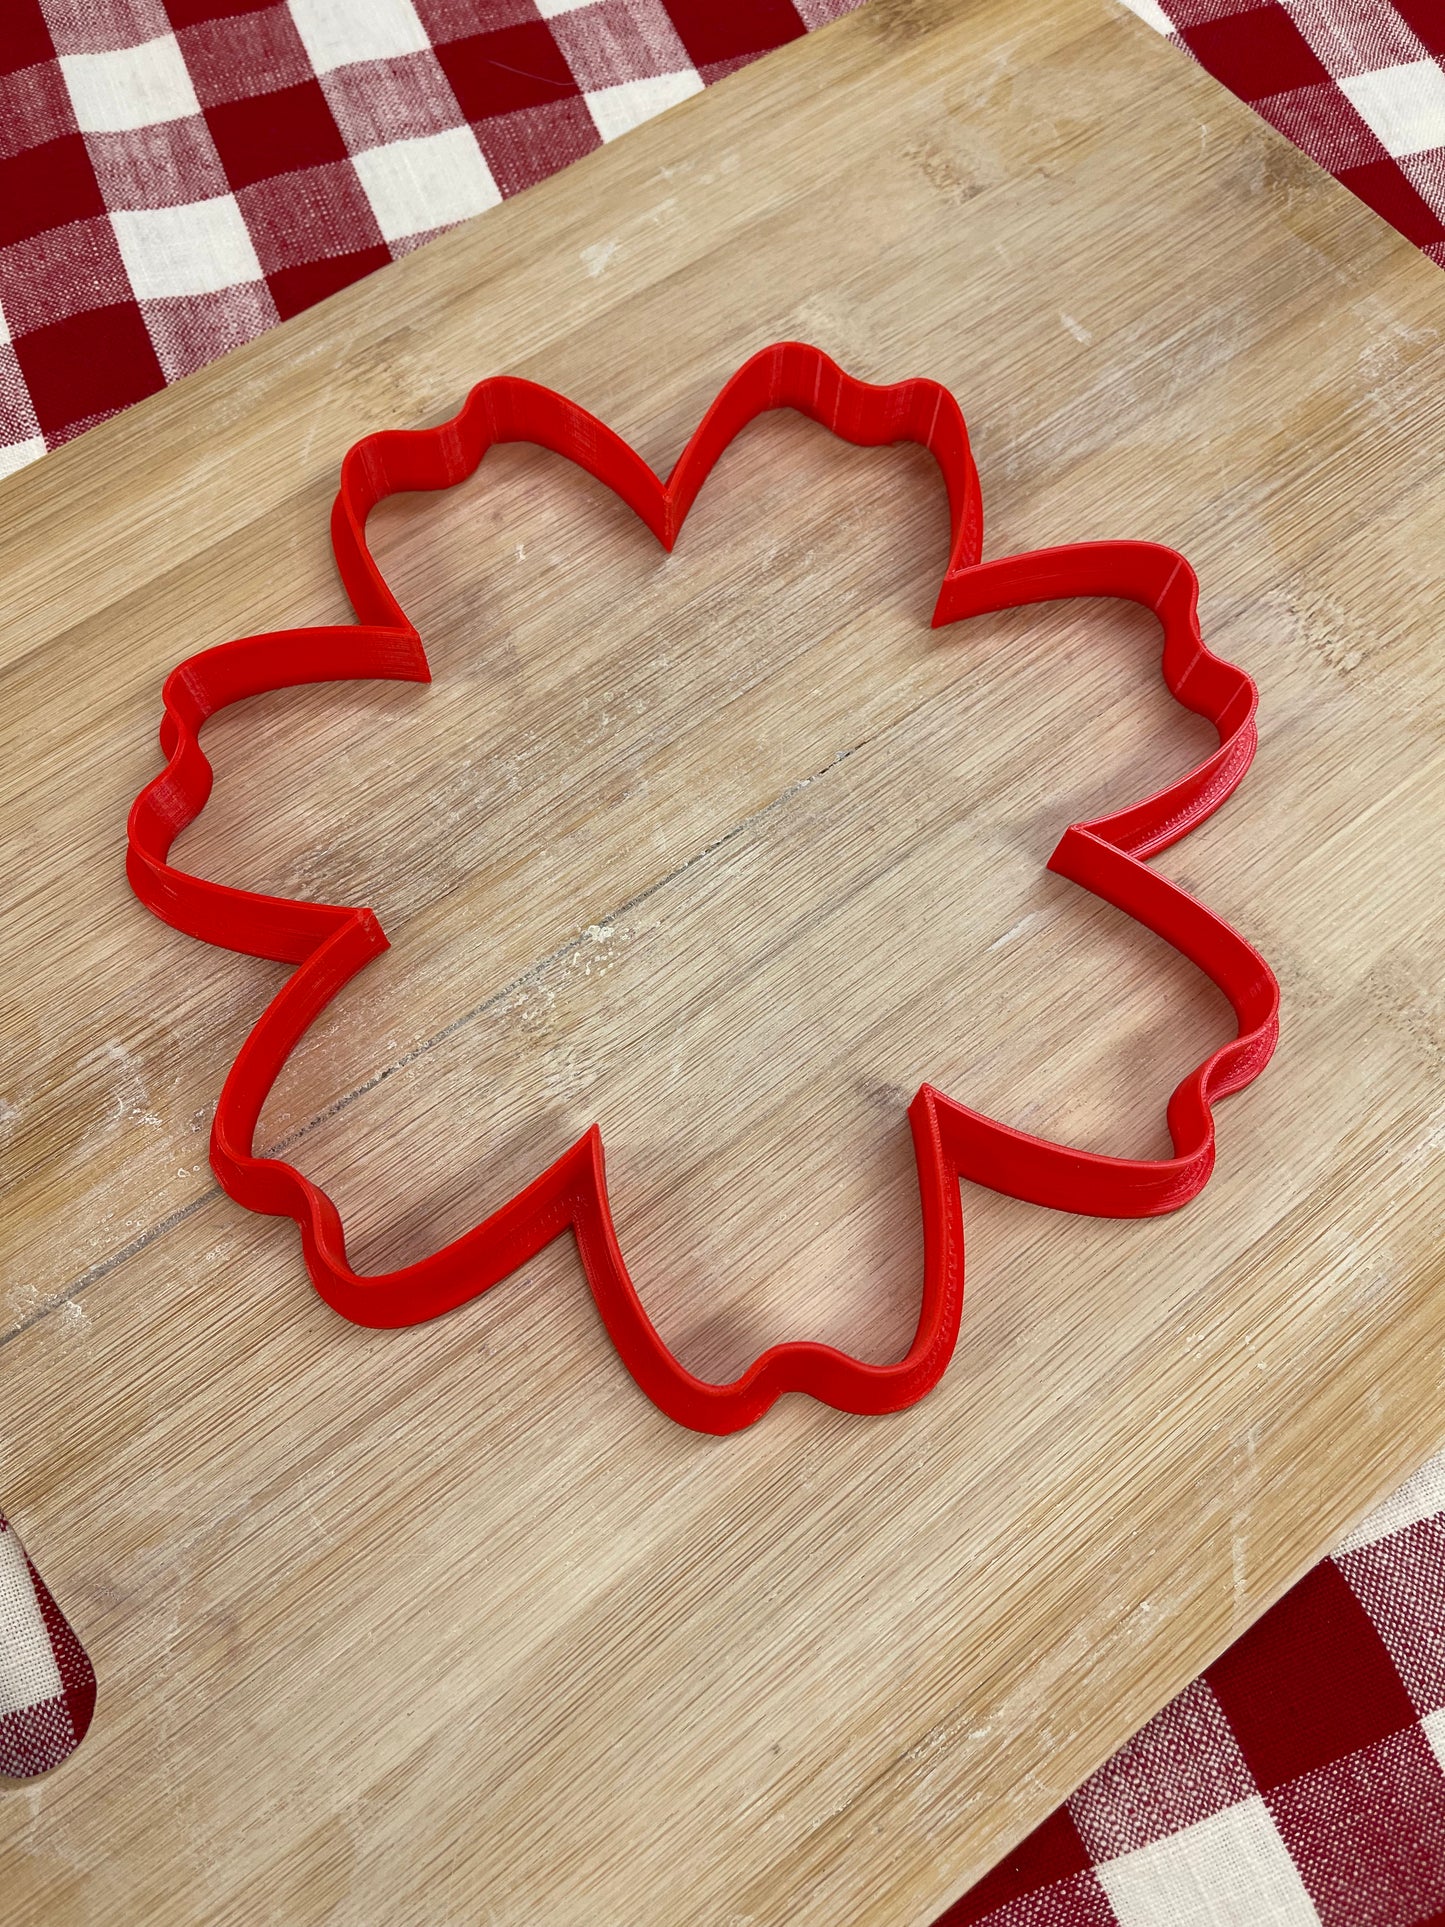 Flower Maria Sampson inspired 7 Petal Design Clay Cutter  - 3D Printed Choose Sizes up to 16"